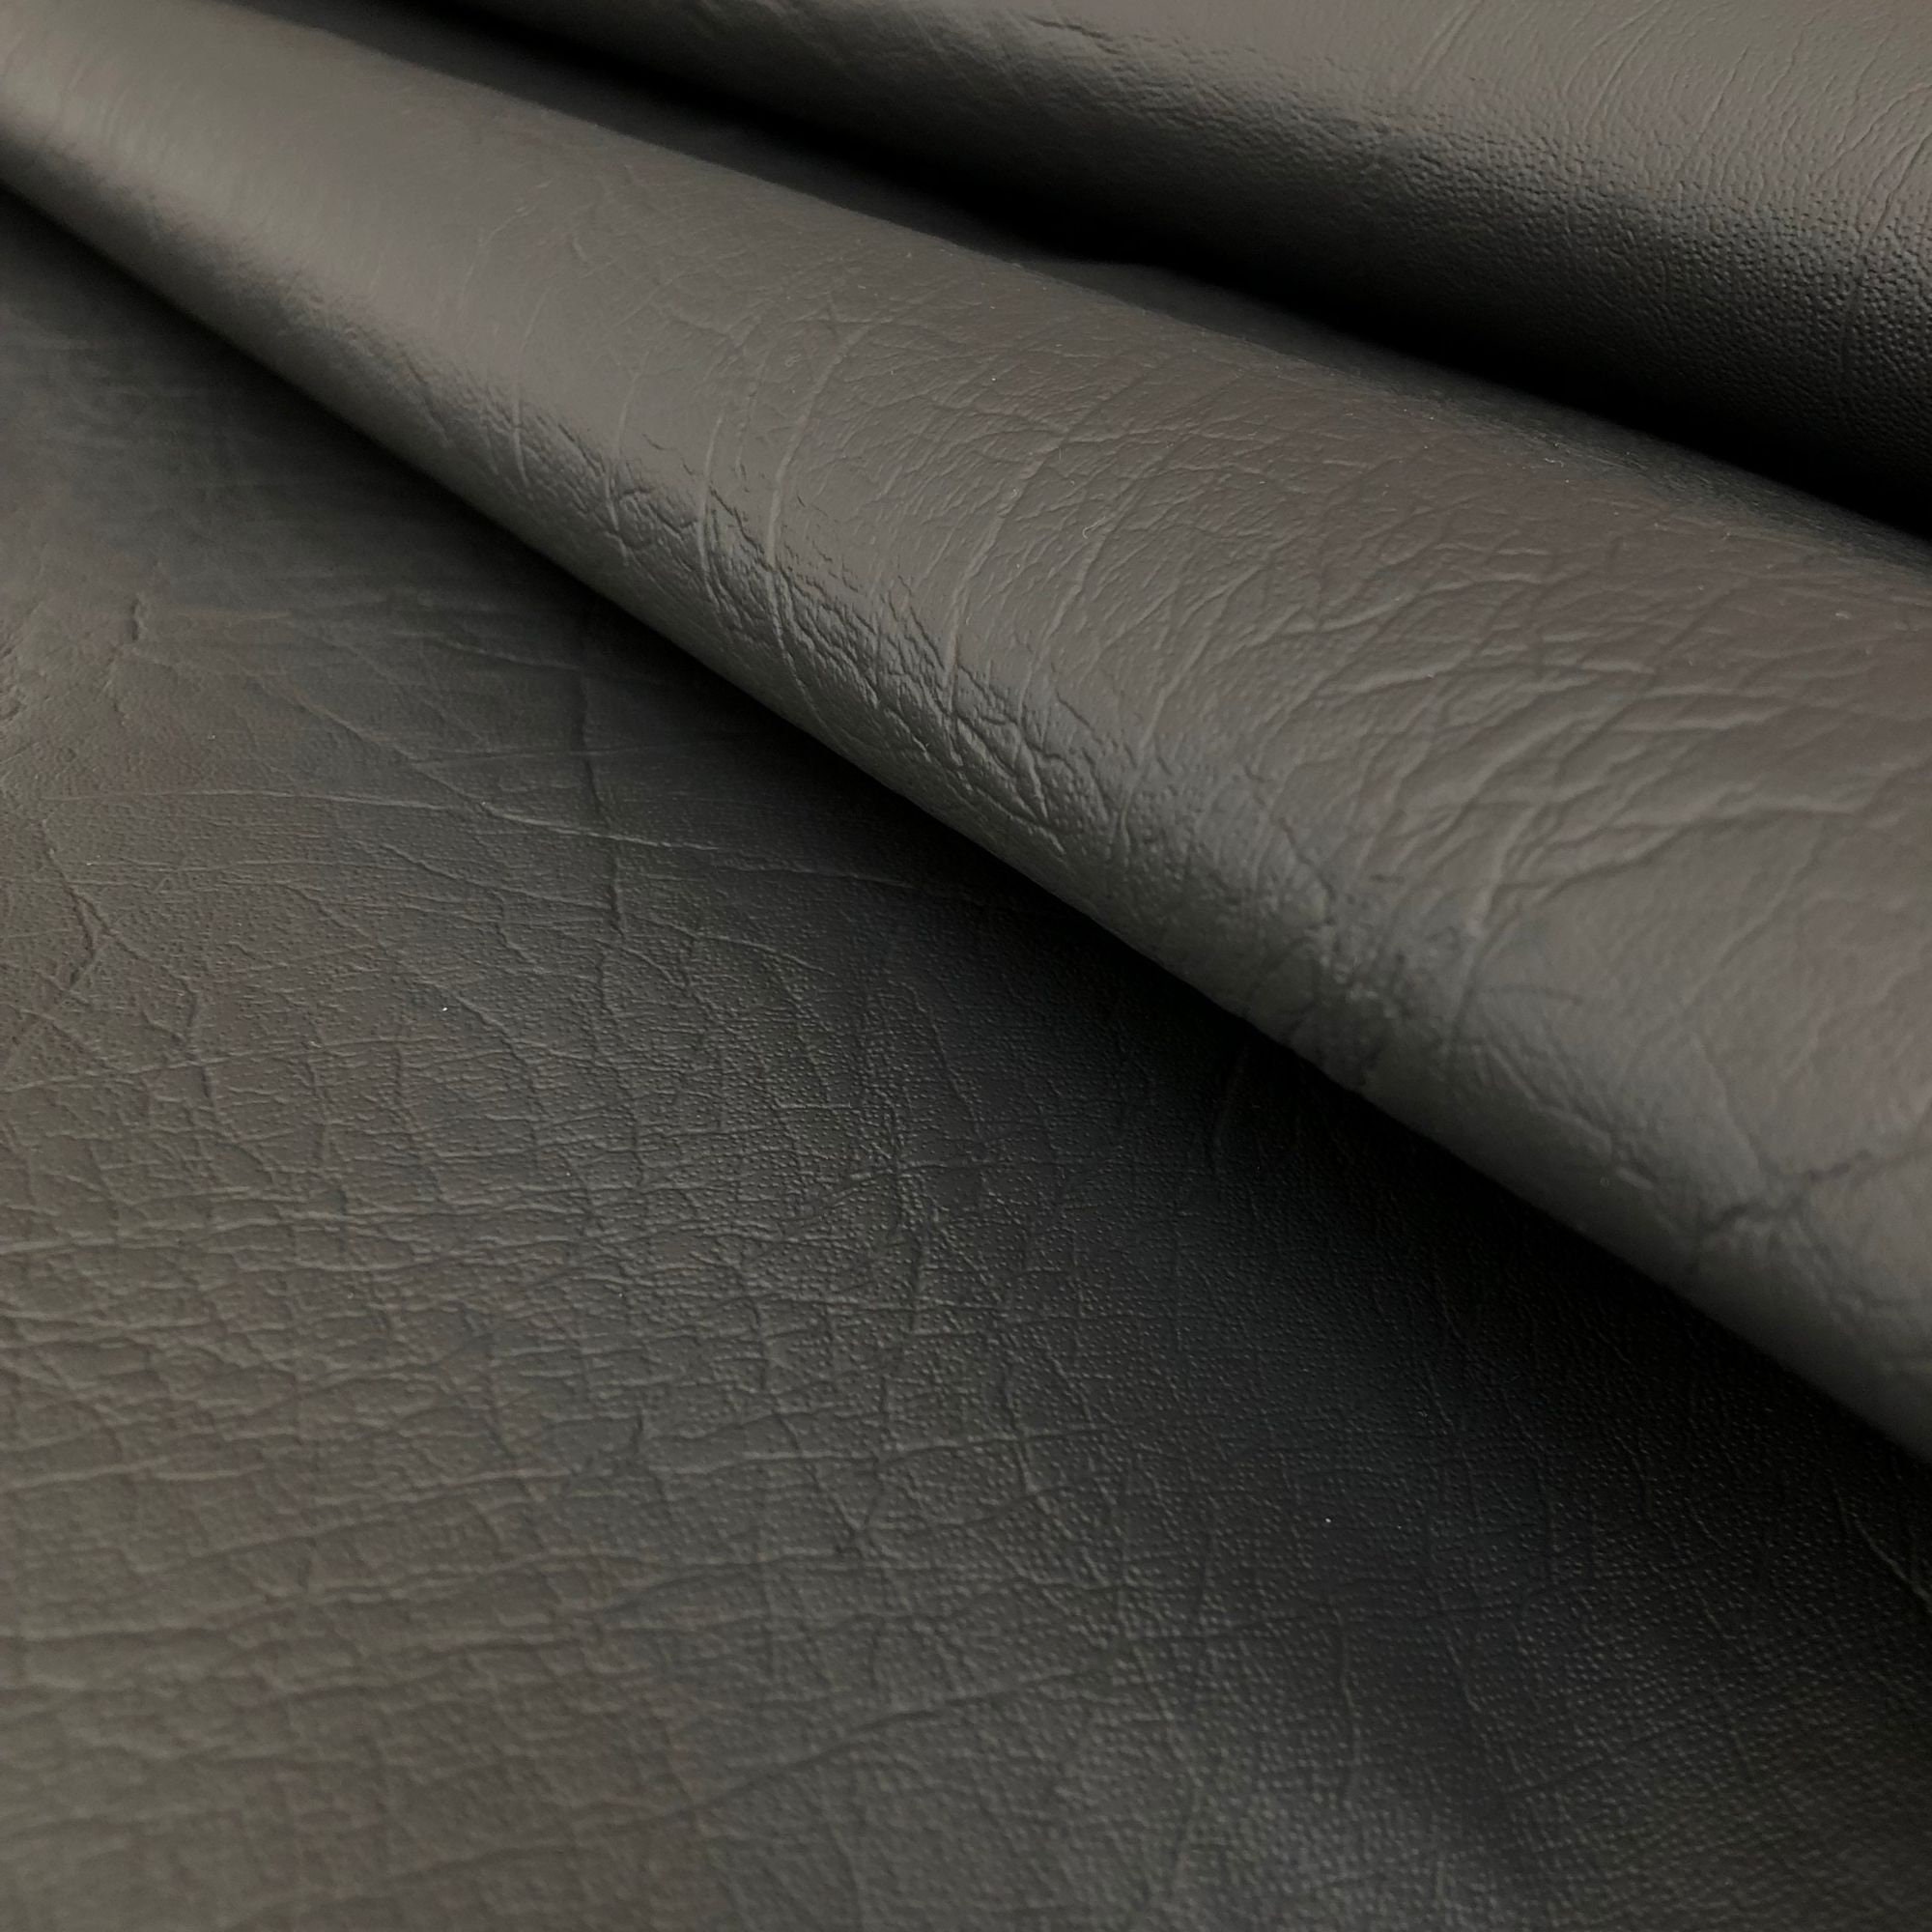 Marine Vinyl Fabric, Upholstery Faux Leather, Outdoor Boat Automotive, DIY  and Crafting Pleather - Individual 1 Yard Cut 36x54 (Grey)